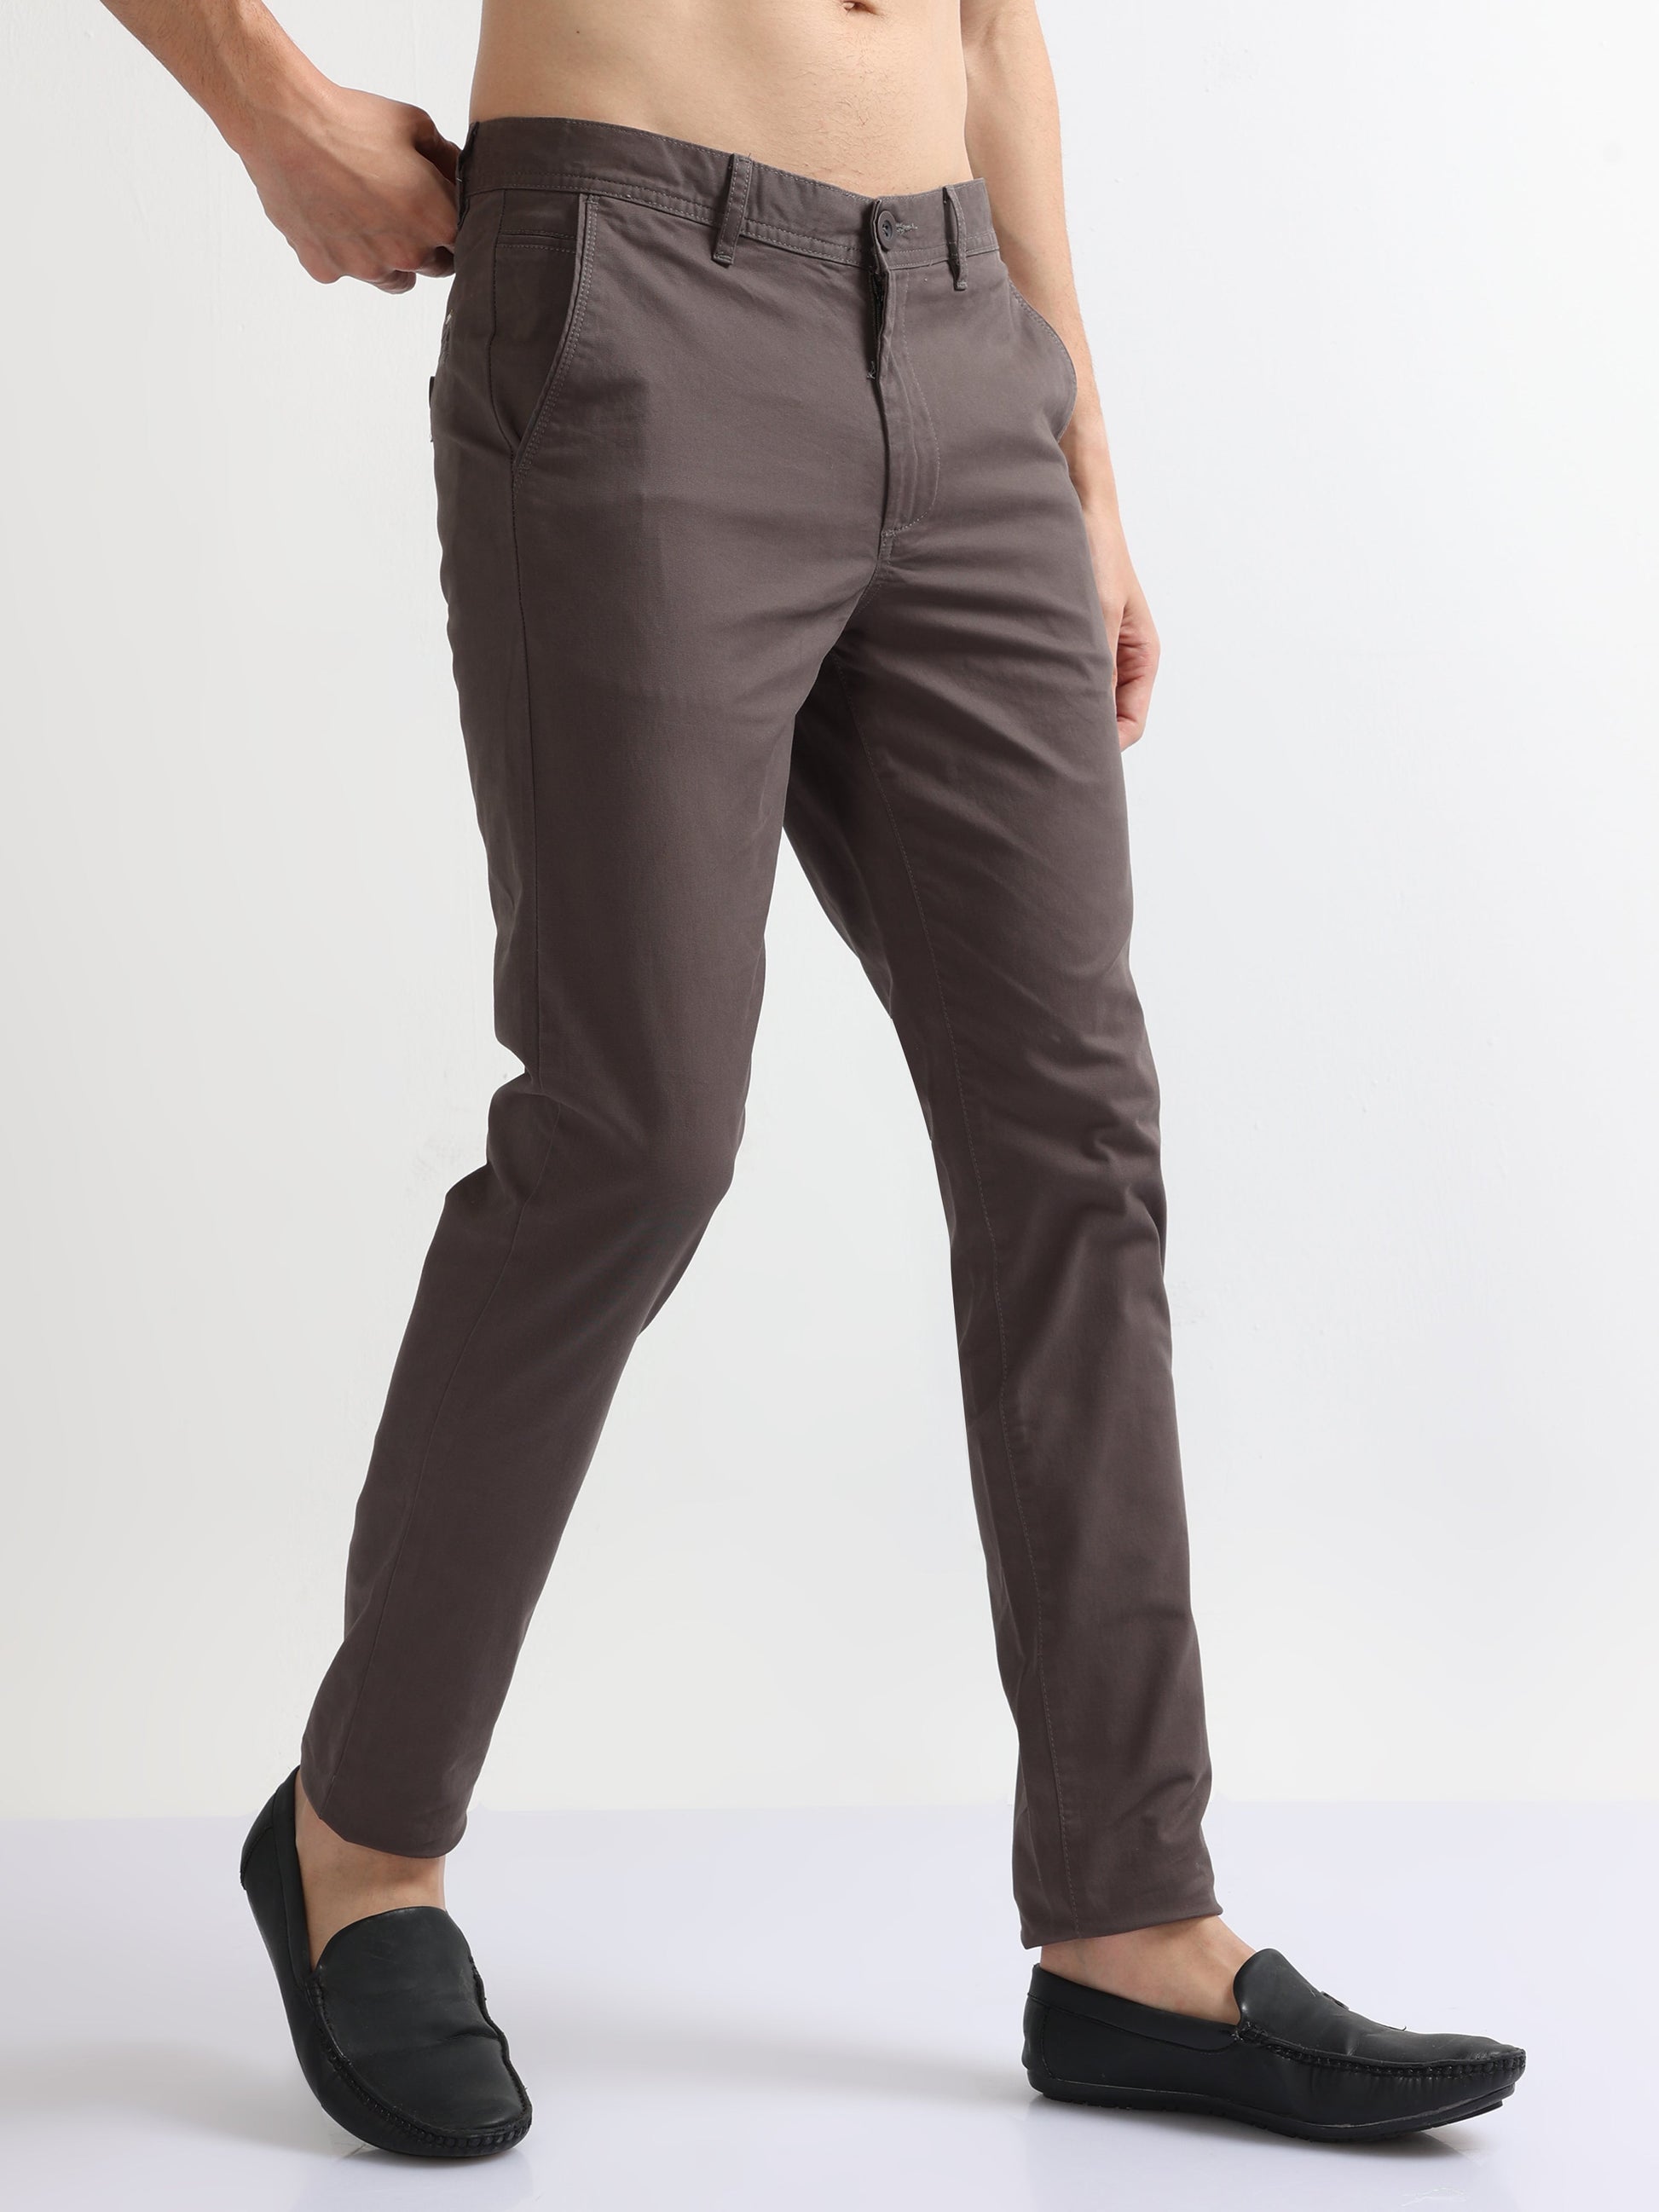 Grey Men's Cotton Twill Stretch Trousers